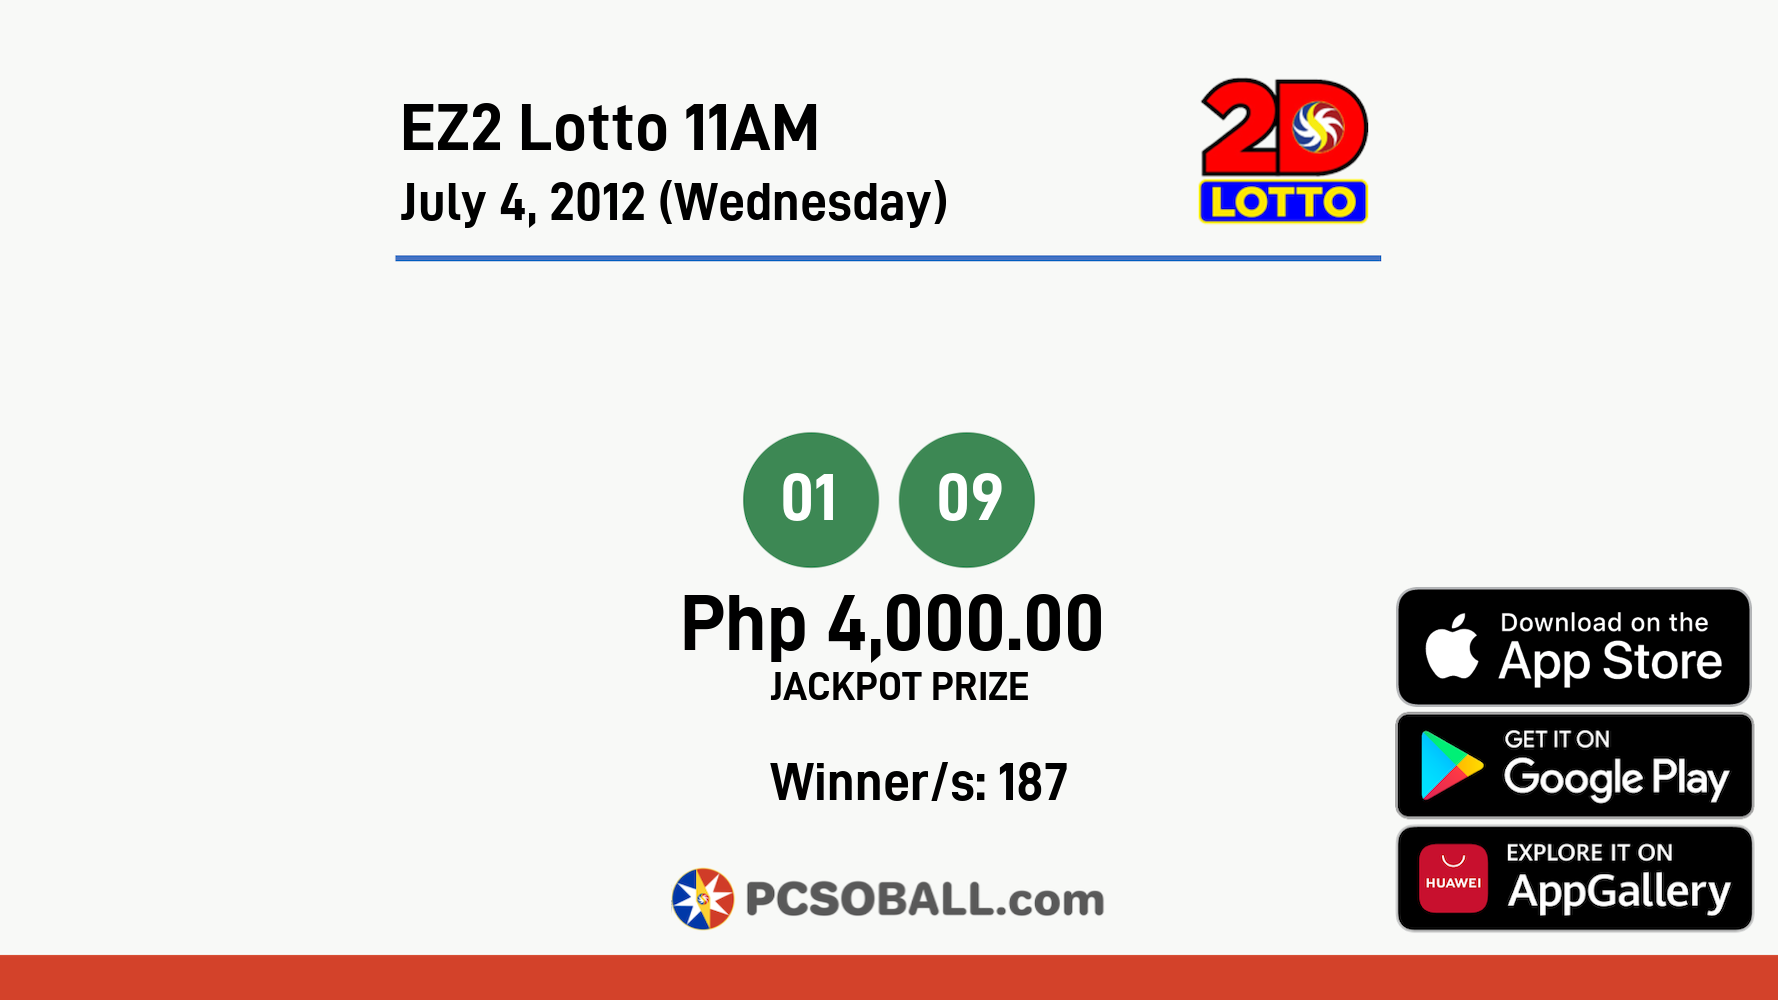 EZ2 Lotto 11AM July 4, 2012 (Wednesday) Result